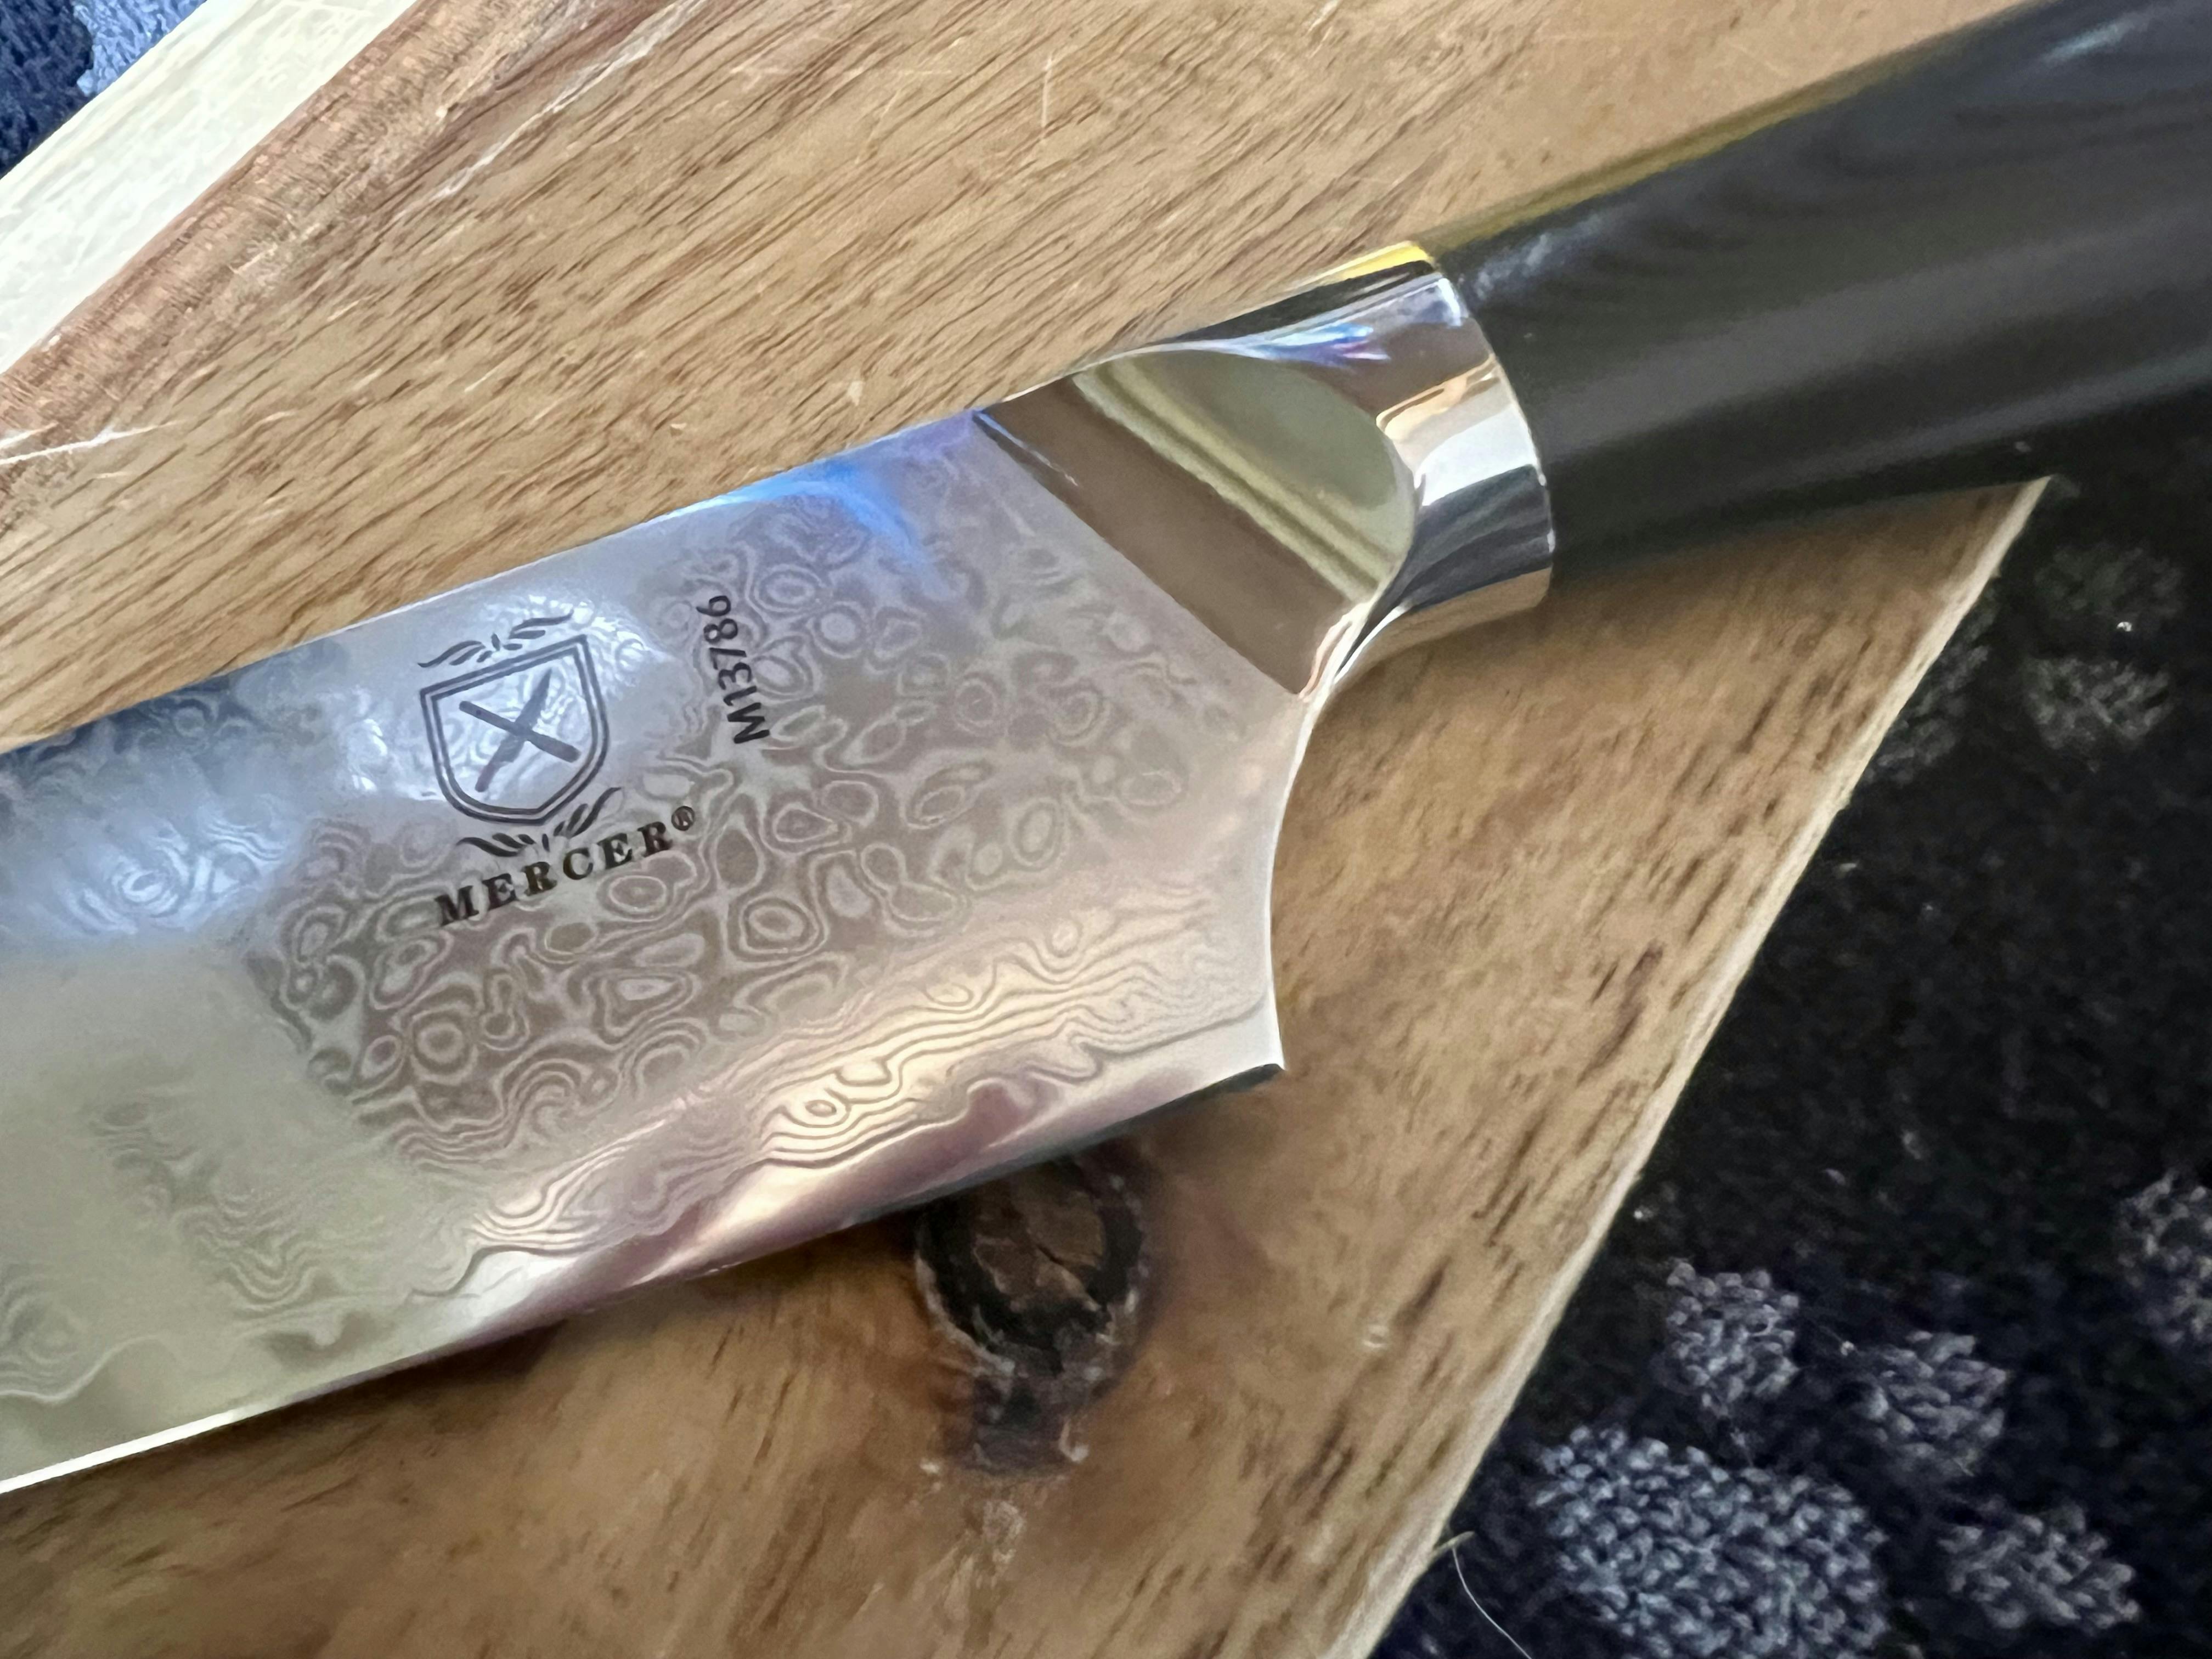 Mercer Culinary M13780 8 Damascus Chef's Knife with Leaf Etching